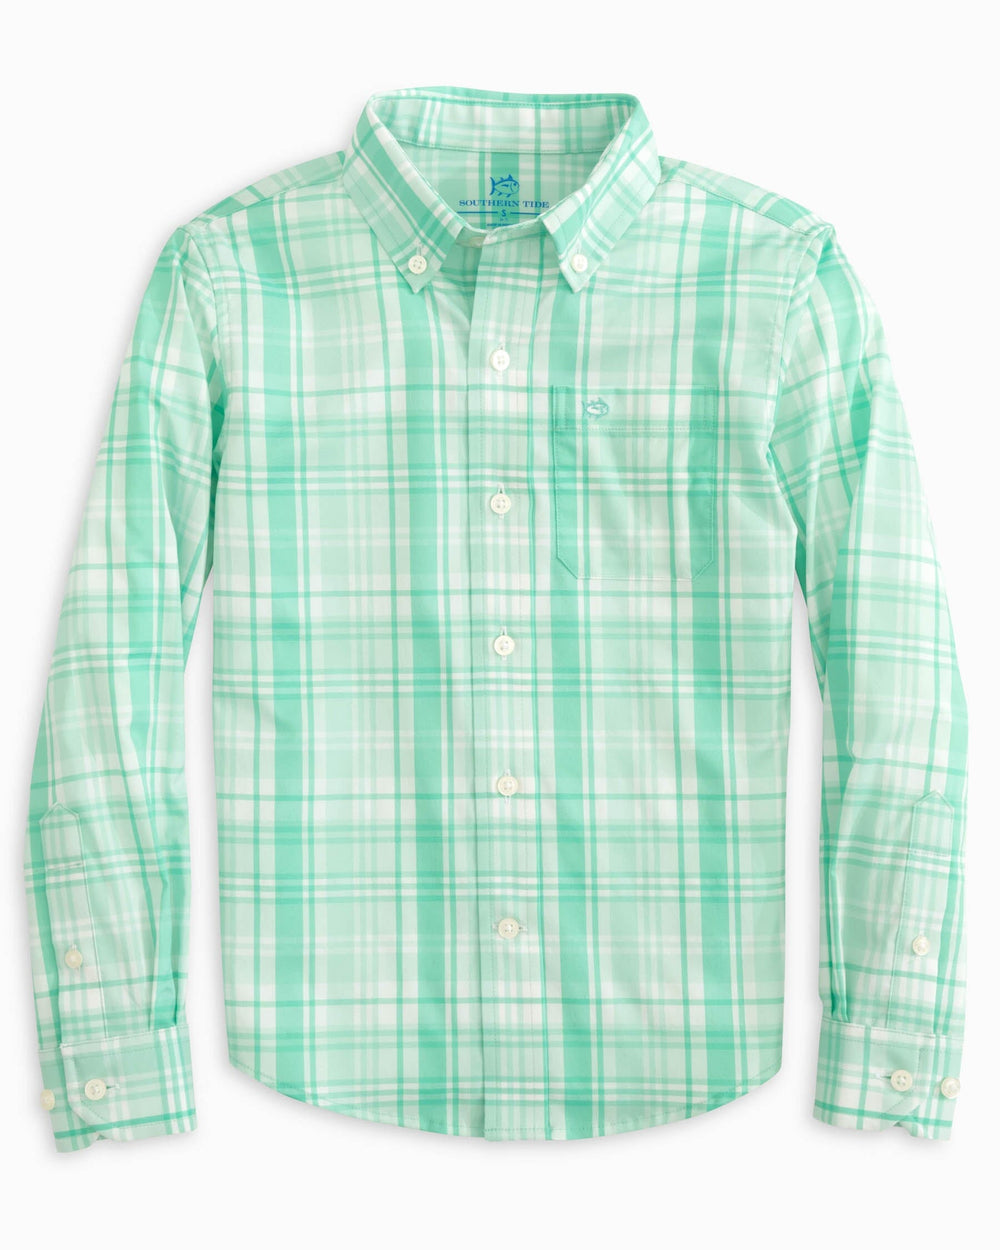 The front view of the Southern Tide Youth Palm Canyon Plaid Intercoastal Sport Shirt by Southern Tide - Baltic Teal